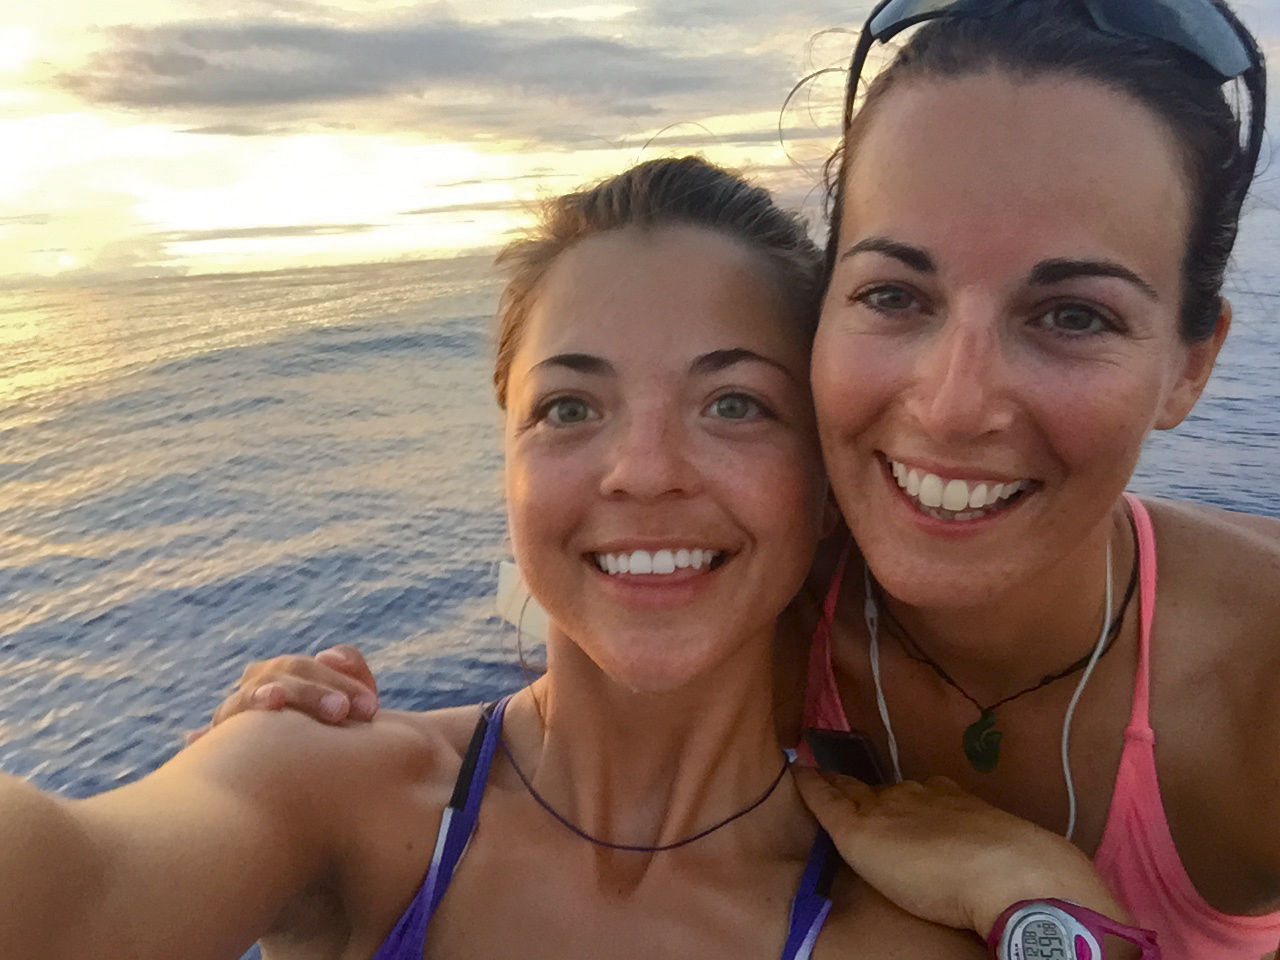 Lizanne and team leader Laura Penhaul in the Pacific Ocean.